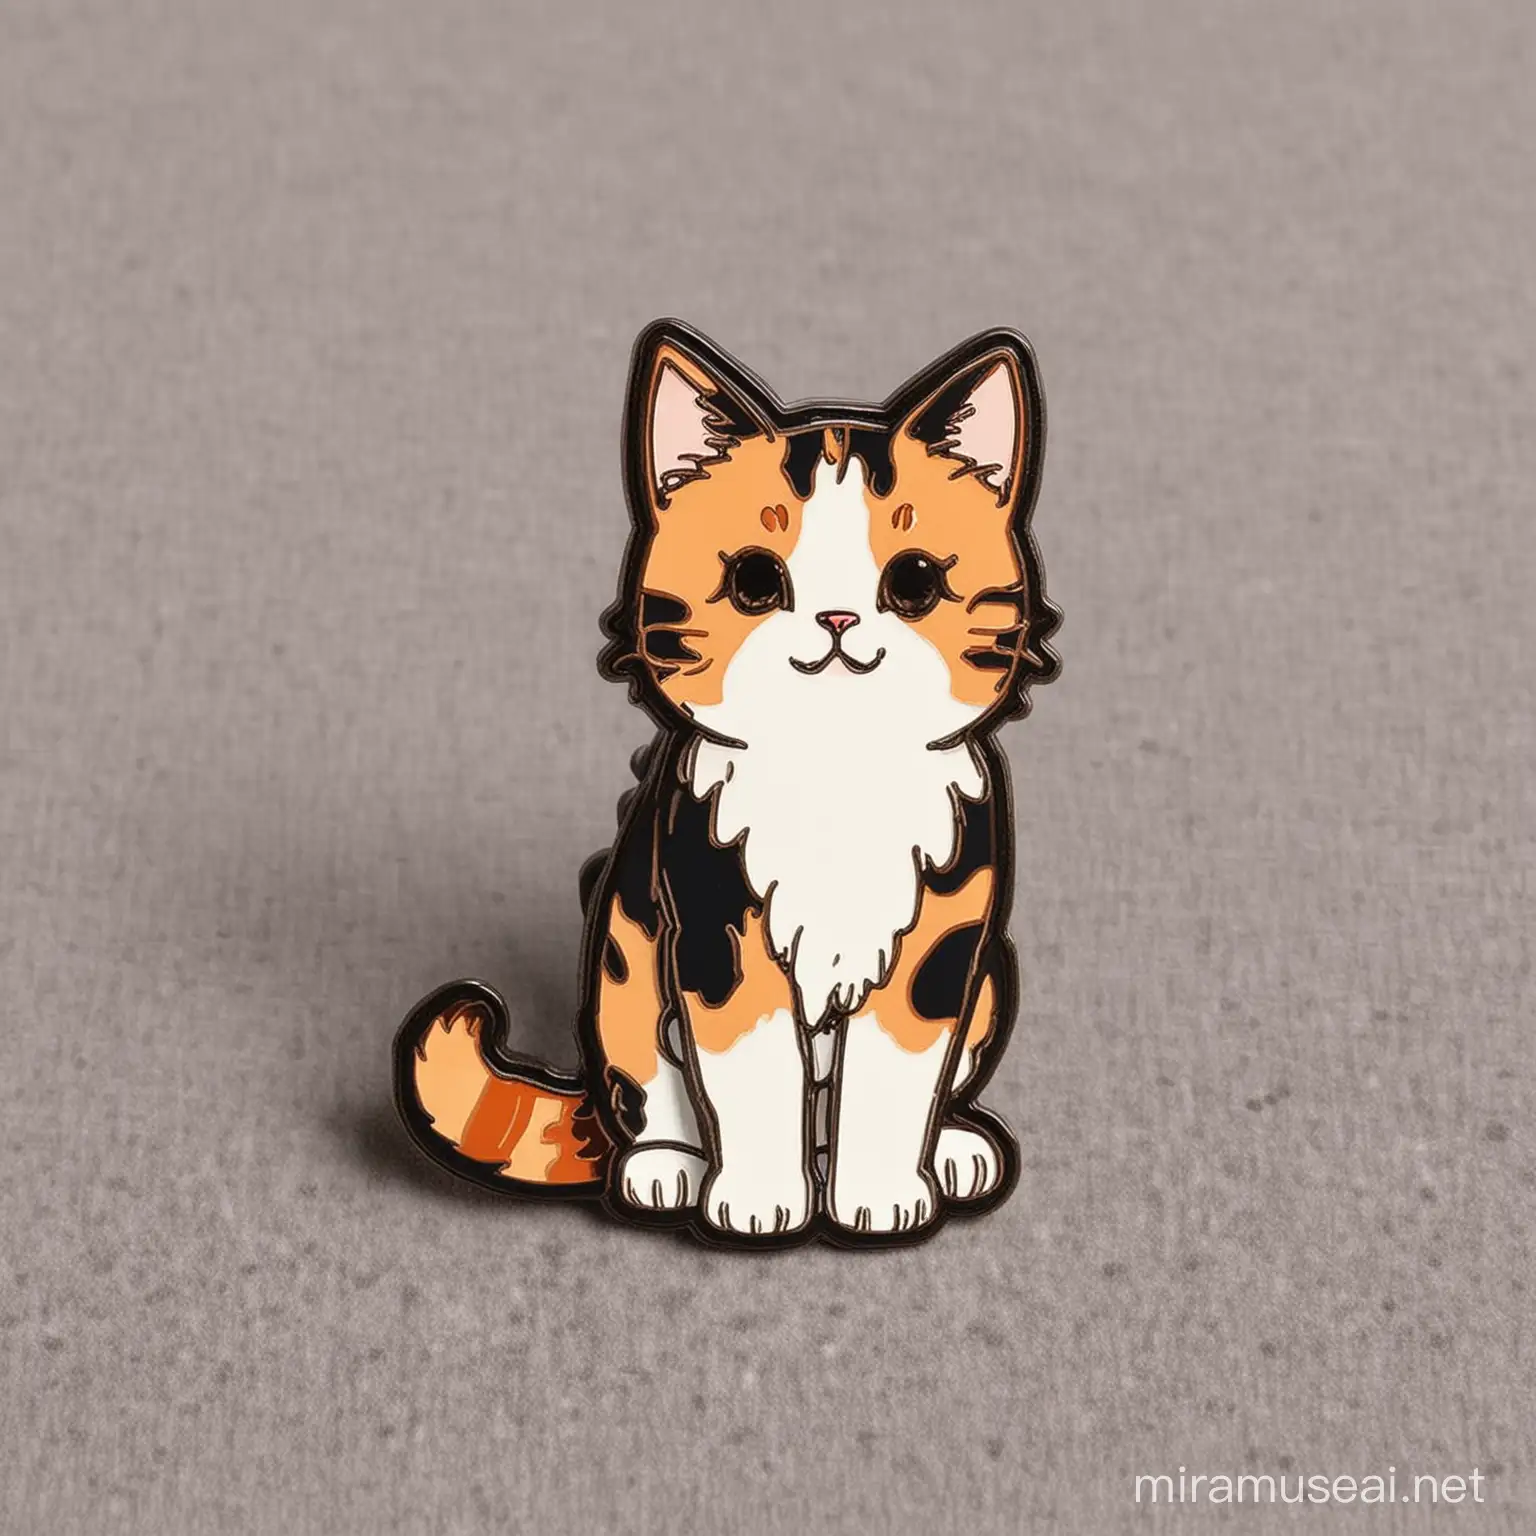 Please create an enamel pin of a cute humanoid calico cat standing on it's hind legs.  It should be cute and appeal to kids of all ages.